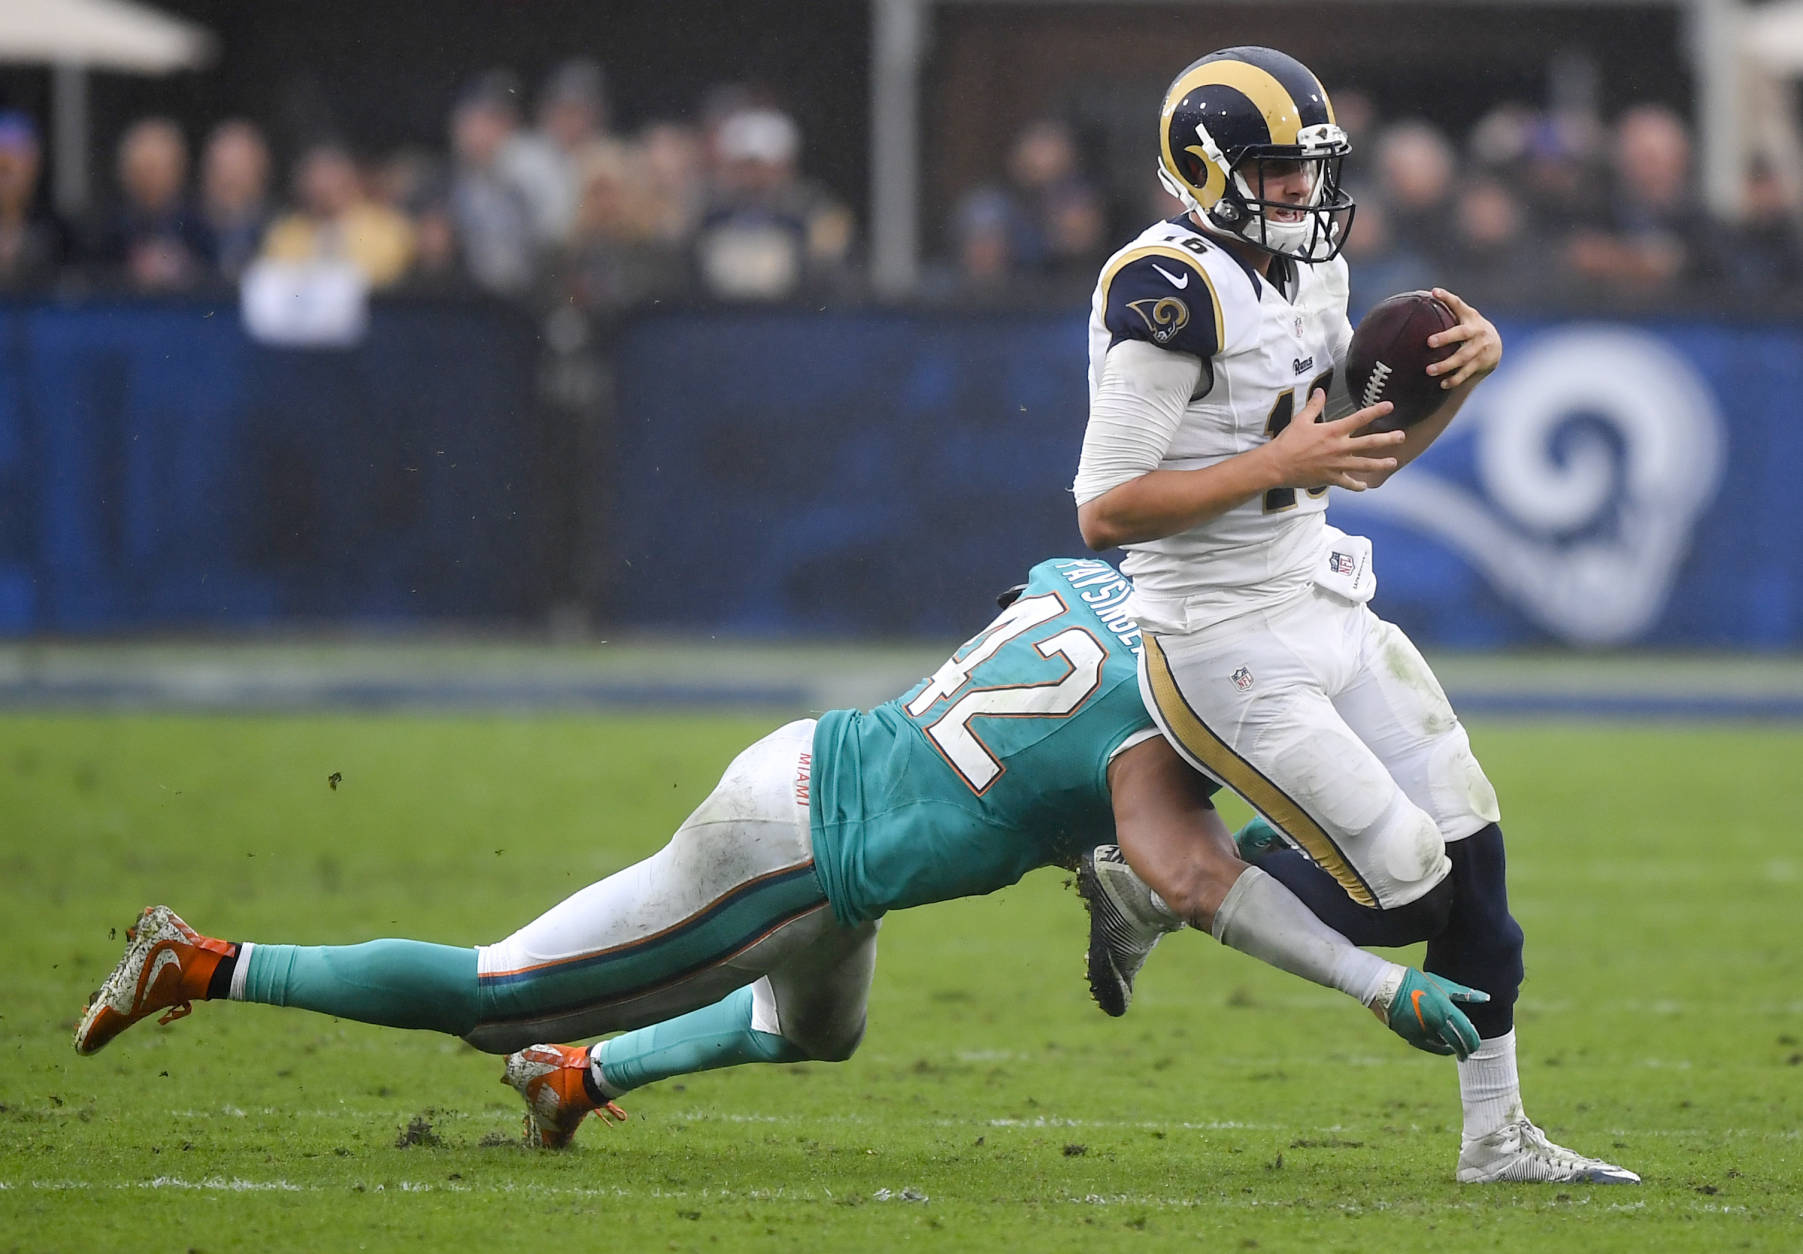 Los Angeles Rams quarterback Jared Goff, right, is tackled by Miami Dolphins linebacker Spencer Paysinger during the second half of an NFL football game Sunday, Nov. 20, 2016, in Los Angeles. (AP Photo/Mark J. Terrill)